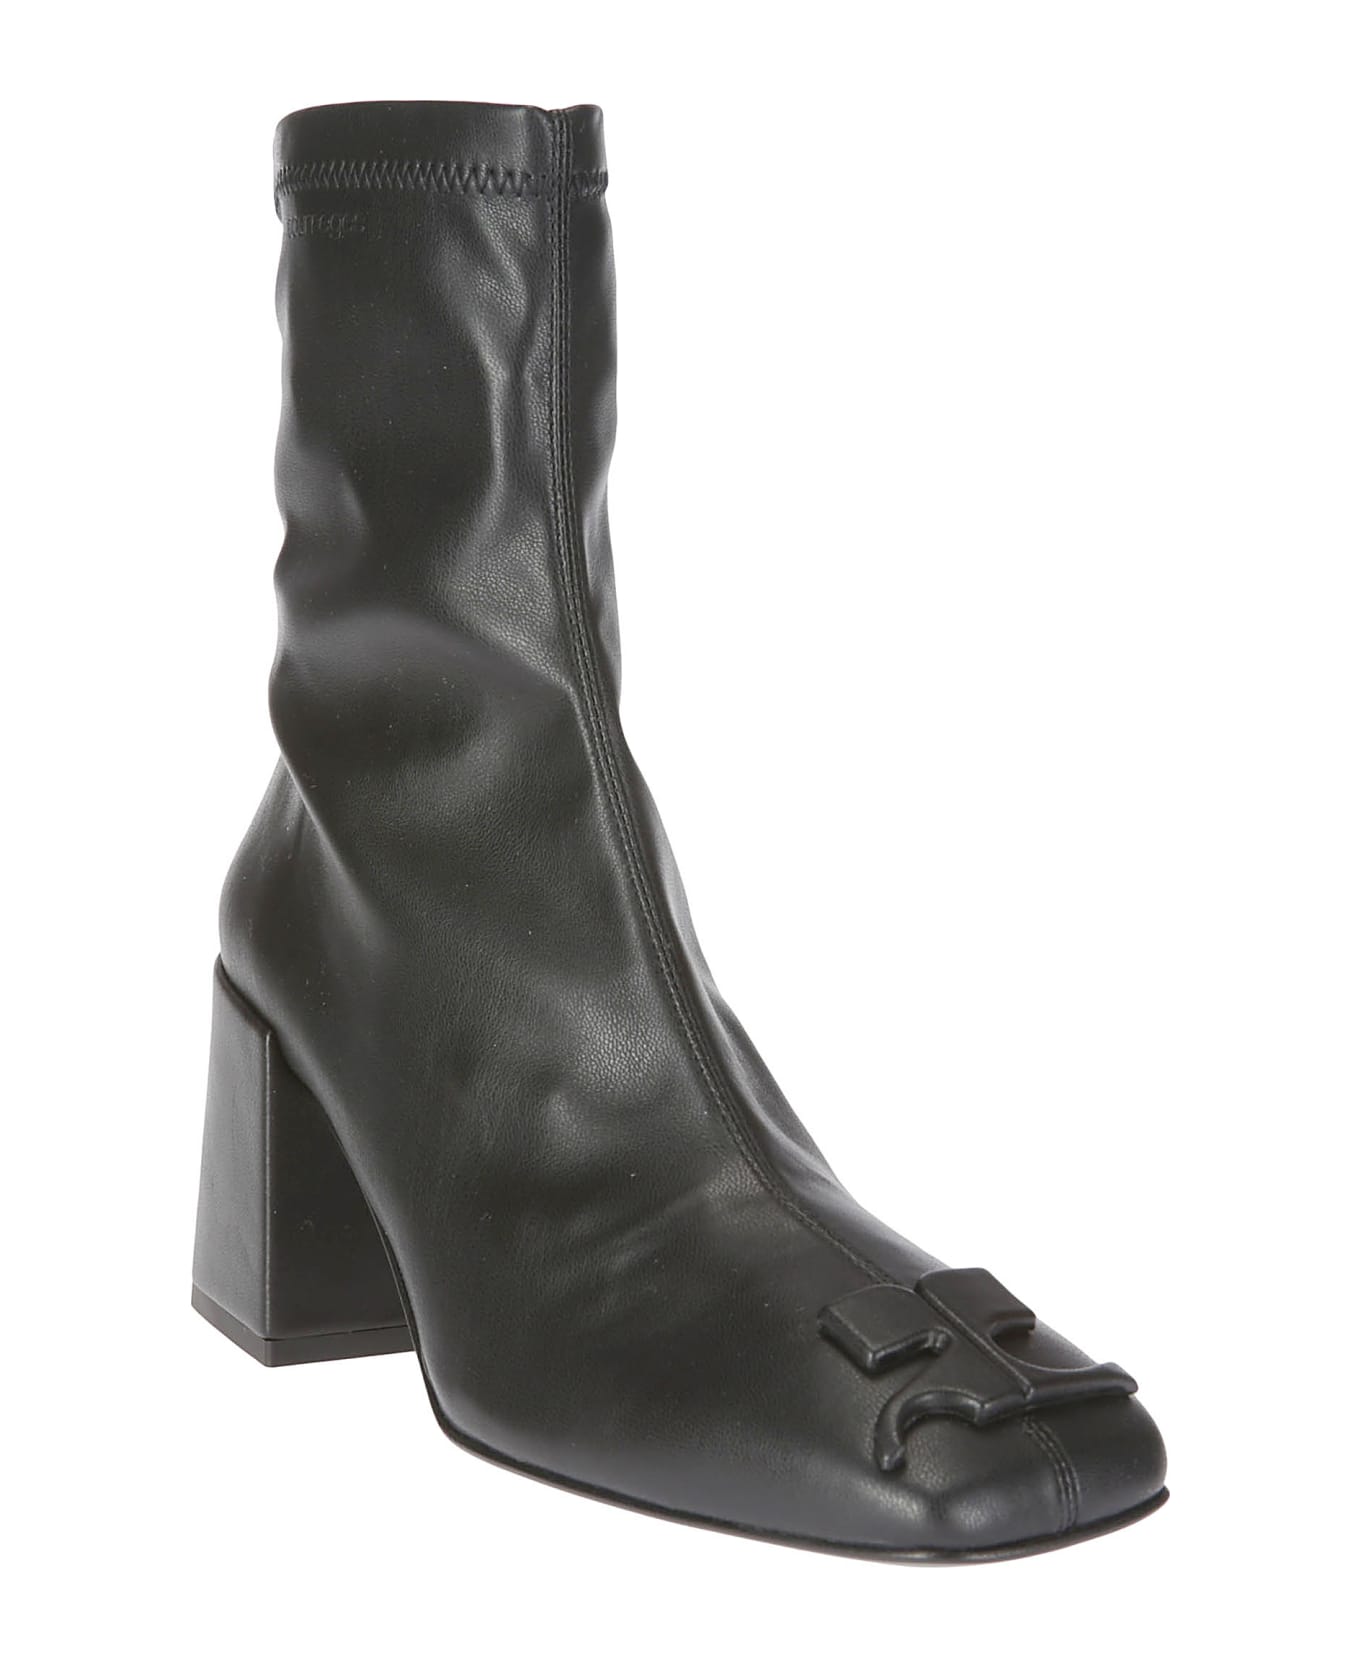 Courrèges Reedition Eco-leather Ac Ankle Boots - BLACK ブーツ